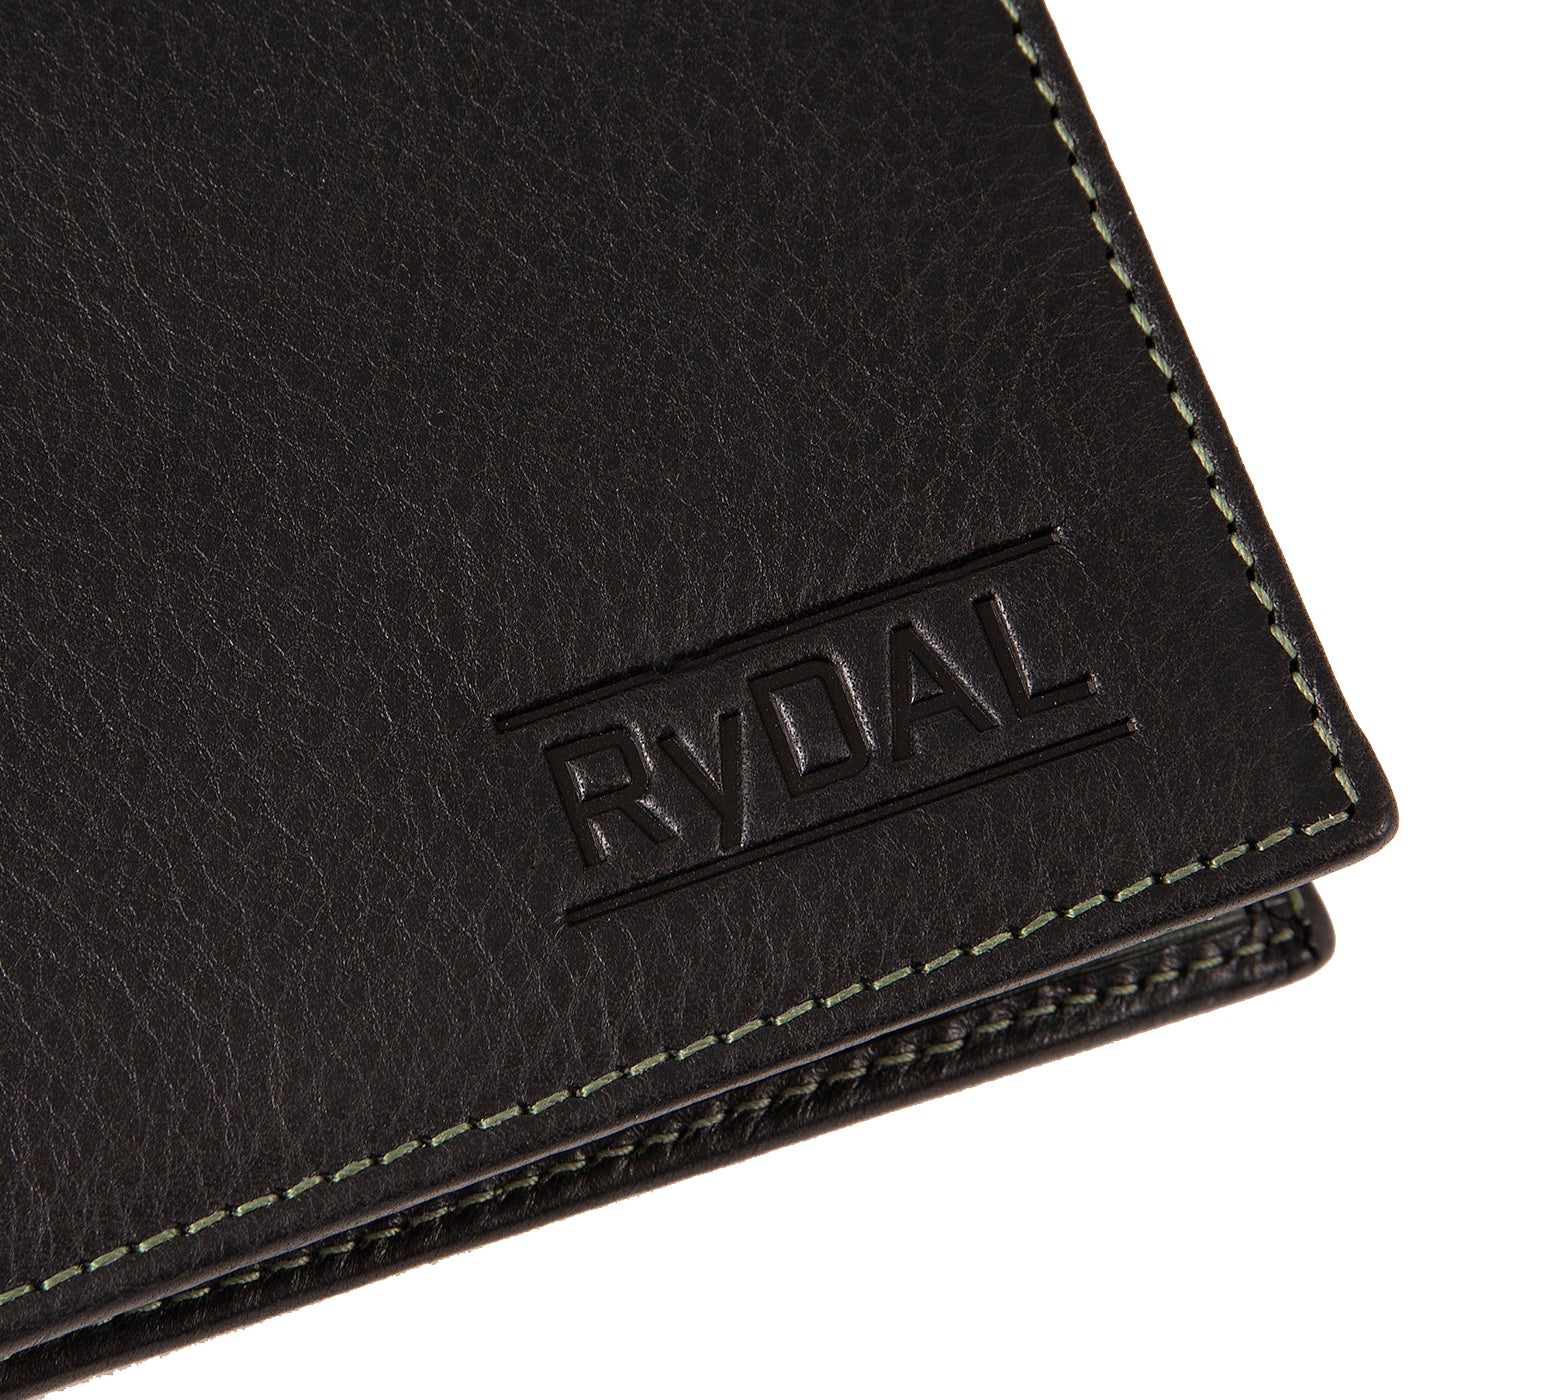 Mens Leather Wallet with Coin Pocket from Rydal in 'Black/Green' showing close up of logo.